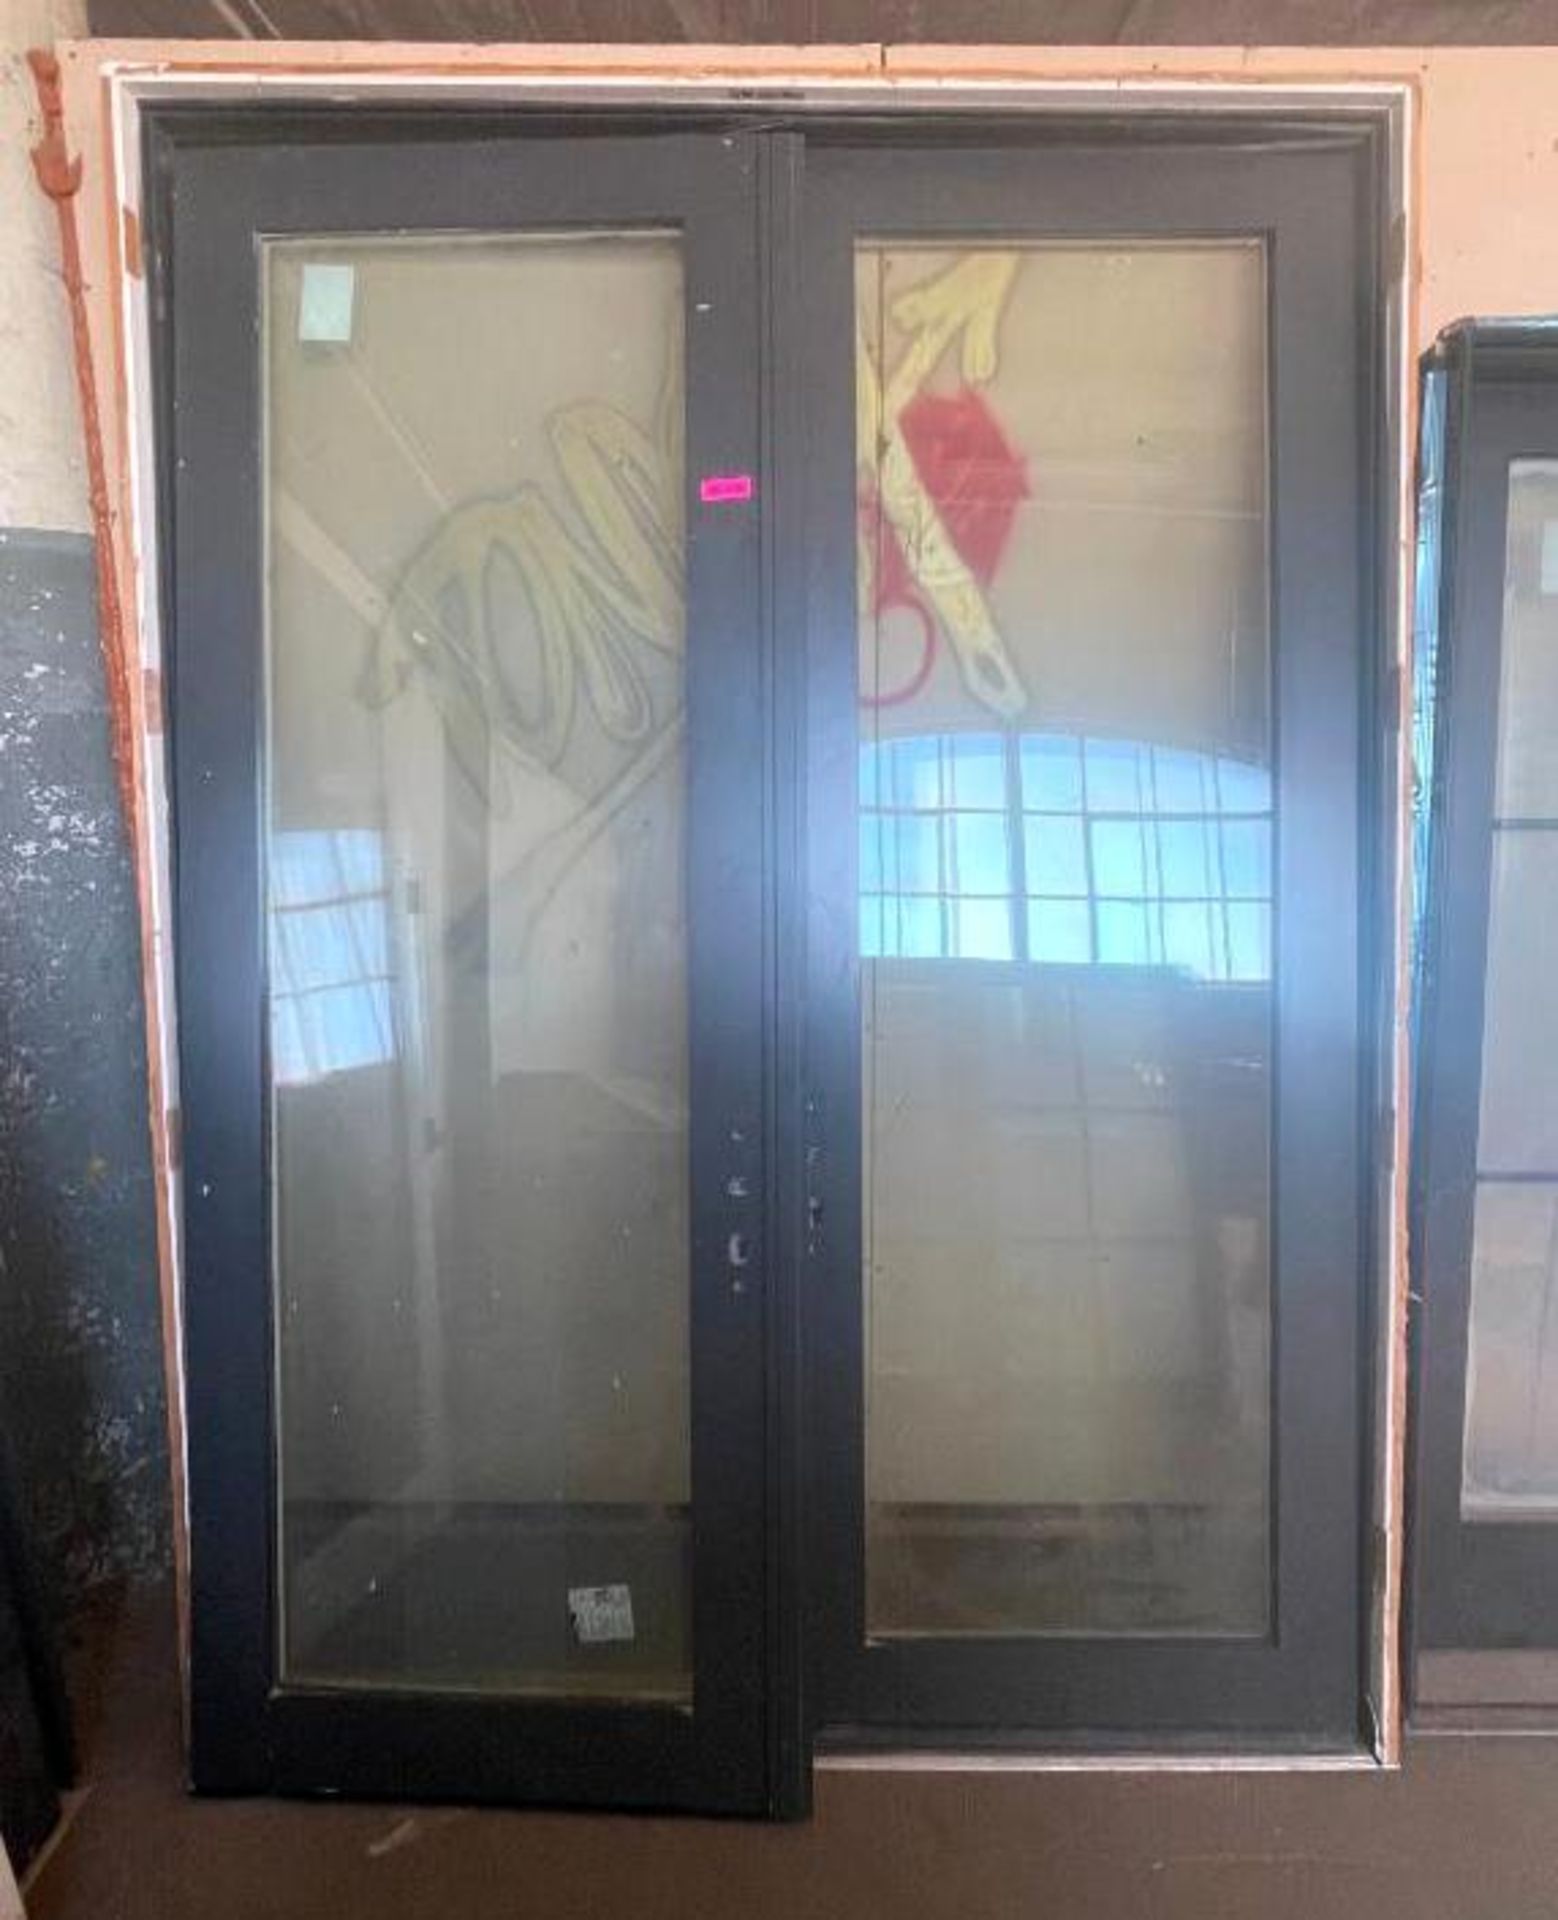 72" X 96" COMMERCIAL GLASS DOOR W/ FRAME BRAND/MODEL: PELLA SIZE: 72" X 96" LOCATION ROOM 1 QTY: 1